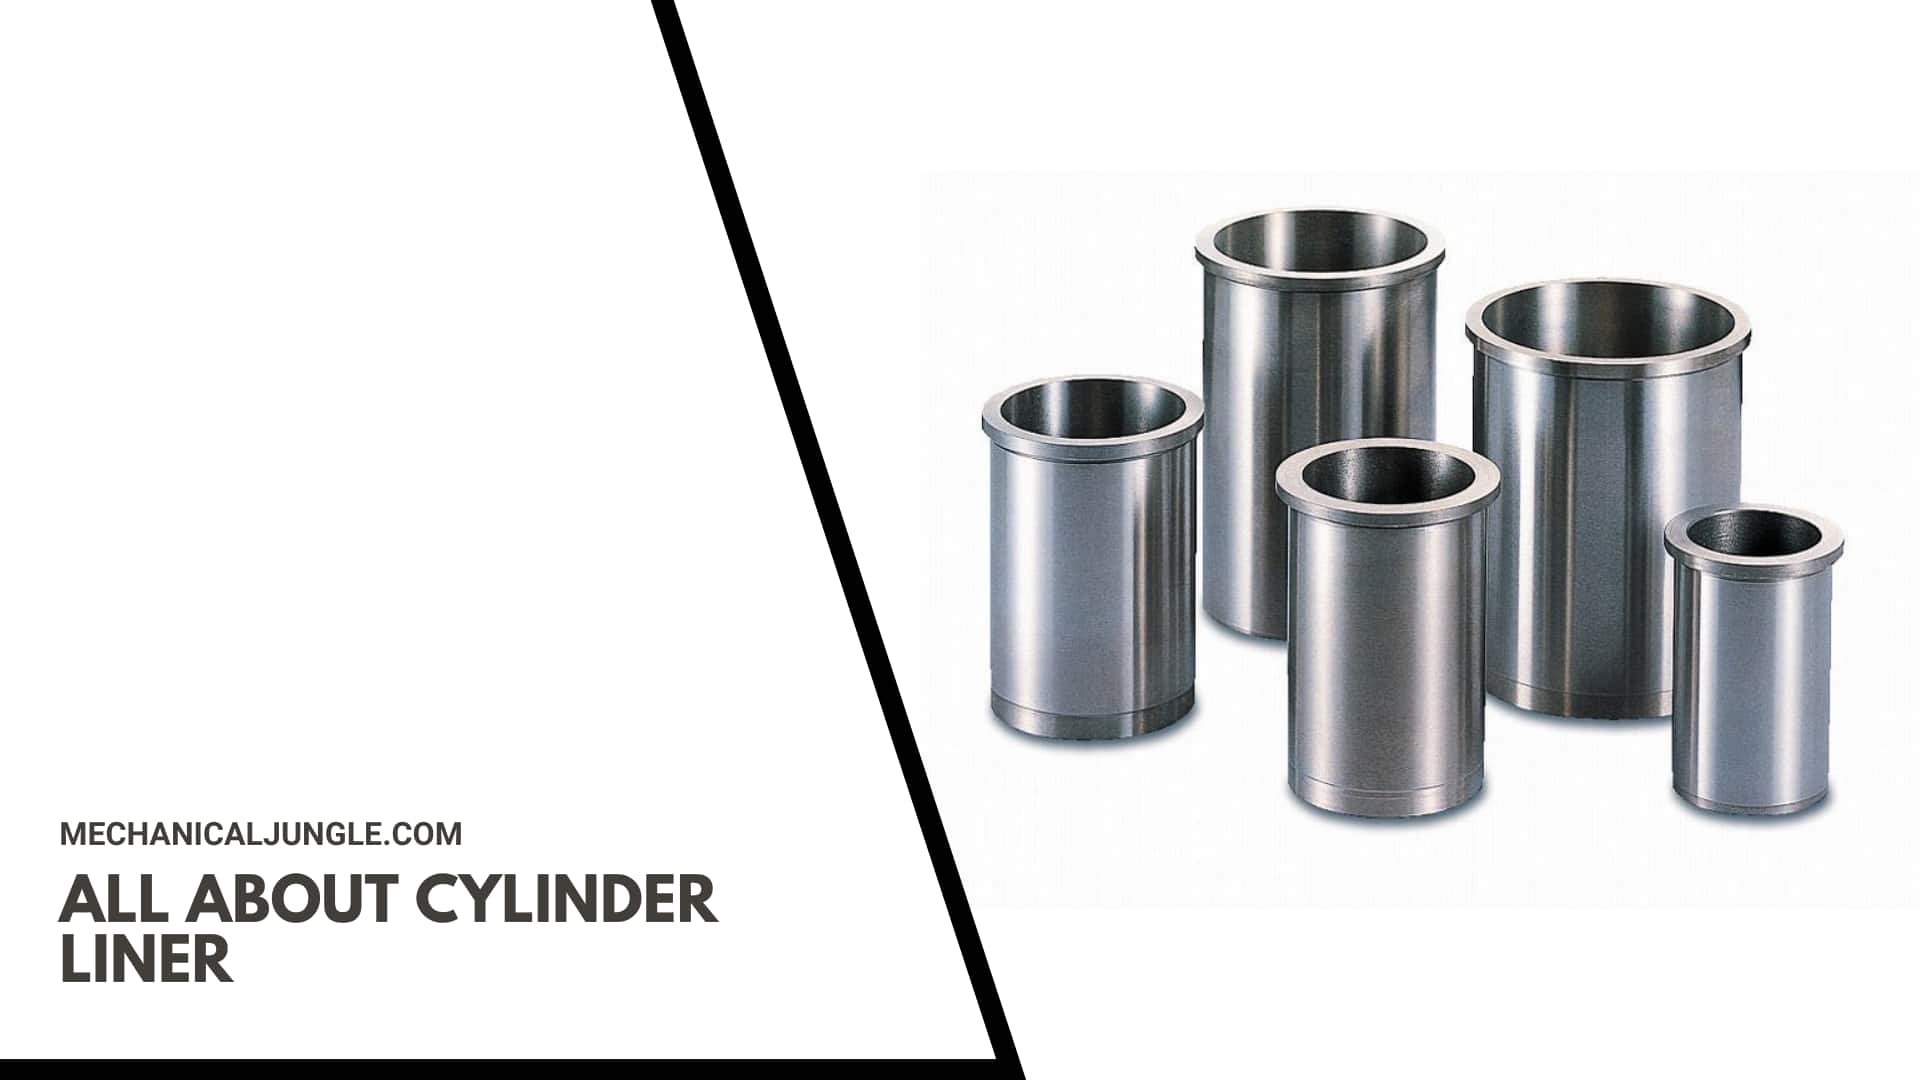 All About Cylinder Liner